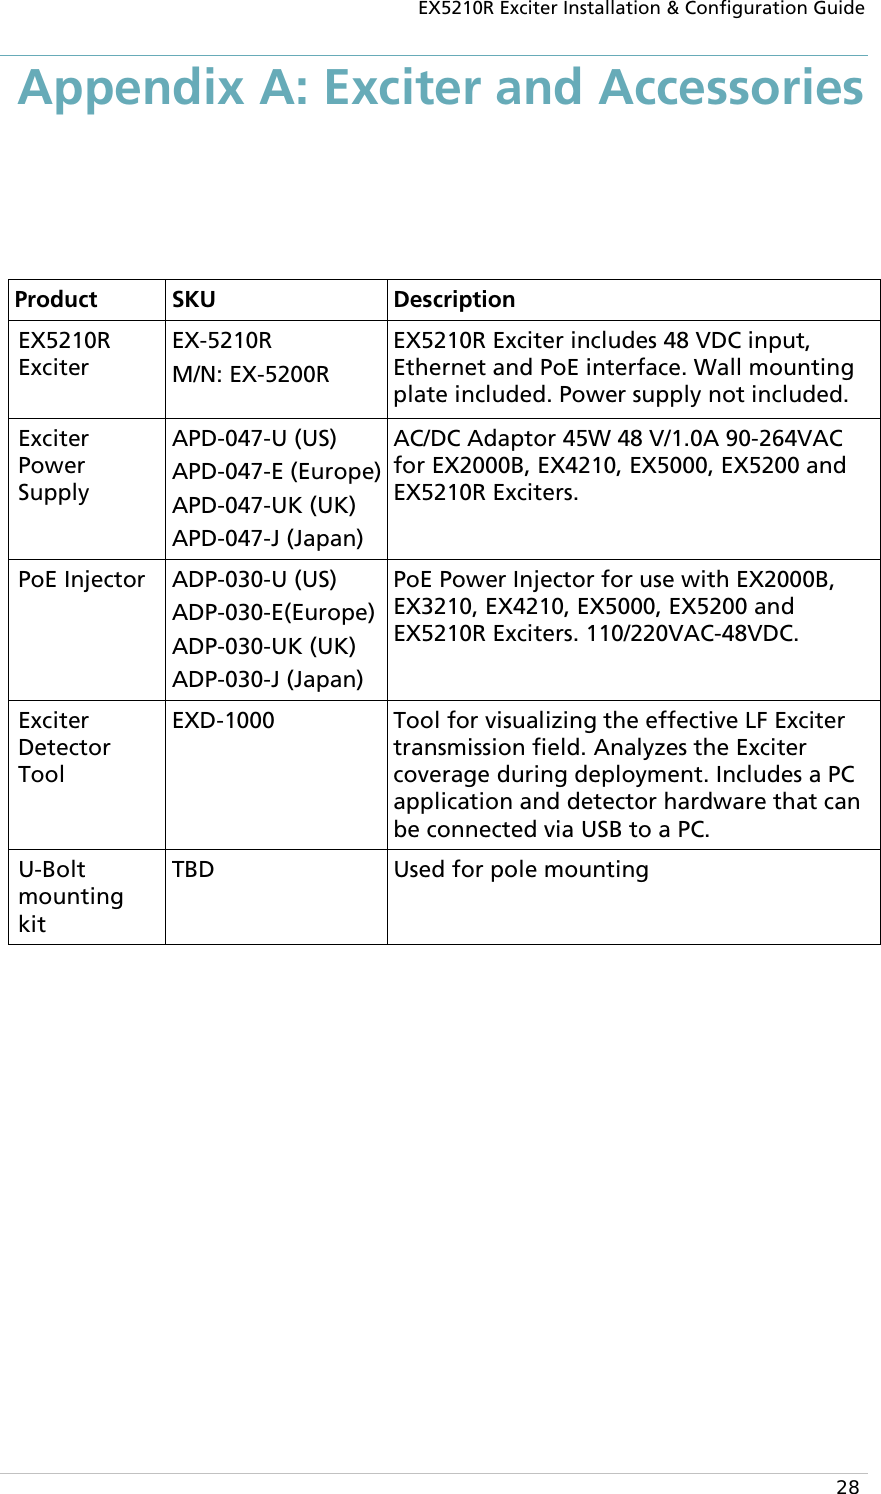 EX5210R Exciter Installation &amp; Configuration Guide  28 Appendix A: Exciter and Accessories  Product SKU Description EX5210R Exciter EX-5210R M/N: EX-5200R EX5210R Exciter includes 48 VDC input, Ethernet and PoE interface. Wall mounting plate included. Power supply not included. Exciter Power Supply APD-047-U (US) APD-047-E (Europe) APD-047-UK (UK) APD-047-J (Japan) AC/DC Adaptor 45W 48 V/1.0A 90-264VAC for EX2000B, EX4210, EX5000, EX5200 and EX5210R Exciters. PoE Injector  ADP-030-U (US) ADP-030-E(Europe) ADP-030-UK (UK) ADP-030-J (Japan) PoE Power Injector for use with EX2000B, EX3210, EX4210, EX5000, EX5200 and EX5210R Exciters. 110/220VAC-48VDC.  Exciter Detector Tool EXD-1000 Tool for visualizing the effective LF Exciter transmission field. Analyzes the Exciter coverage during deployment. Includes a PC application and detector hardware that can be connected via USB to a PC. U-Bolt mounting kit  TBD Used for pole mounting 